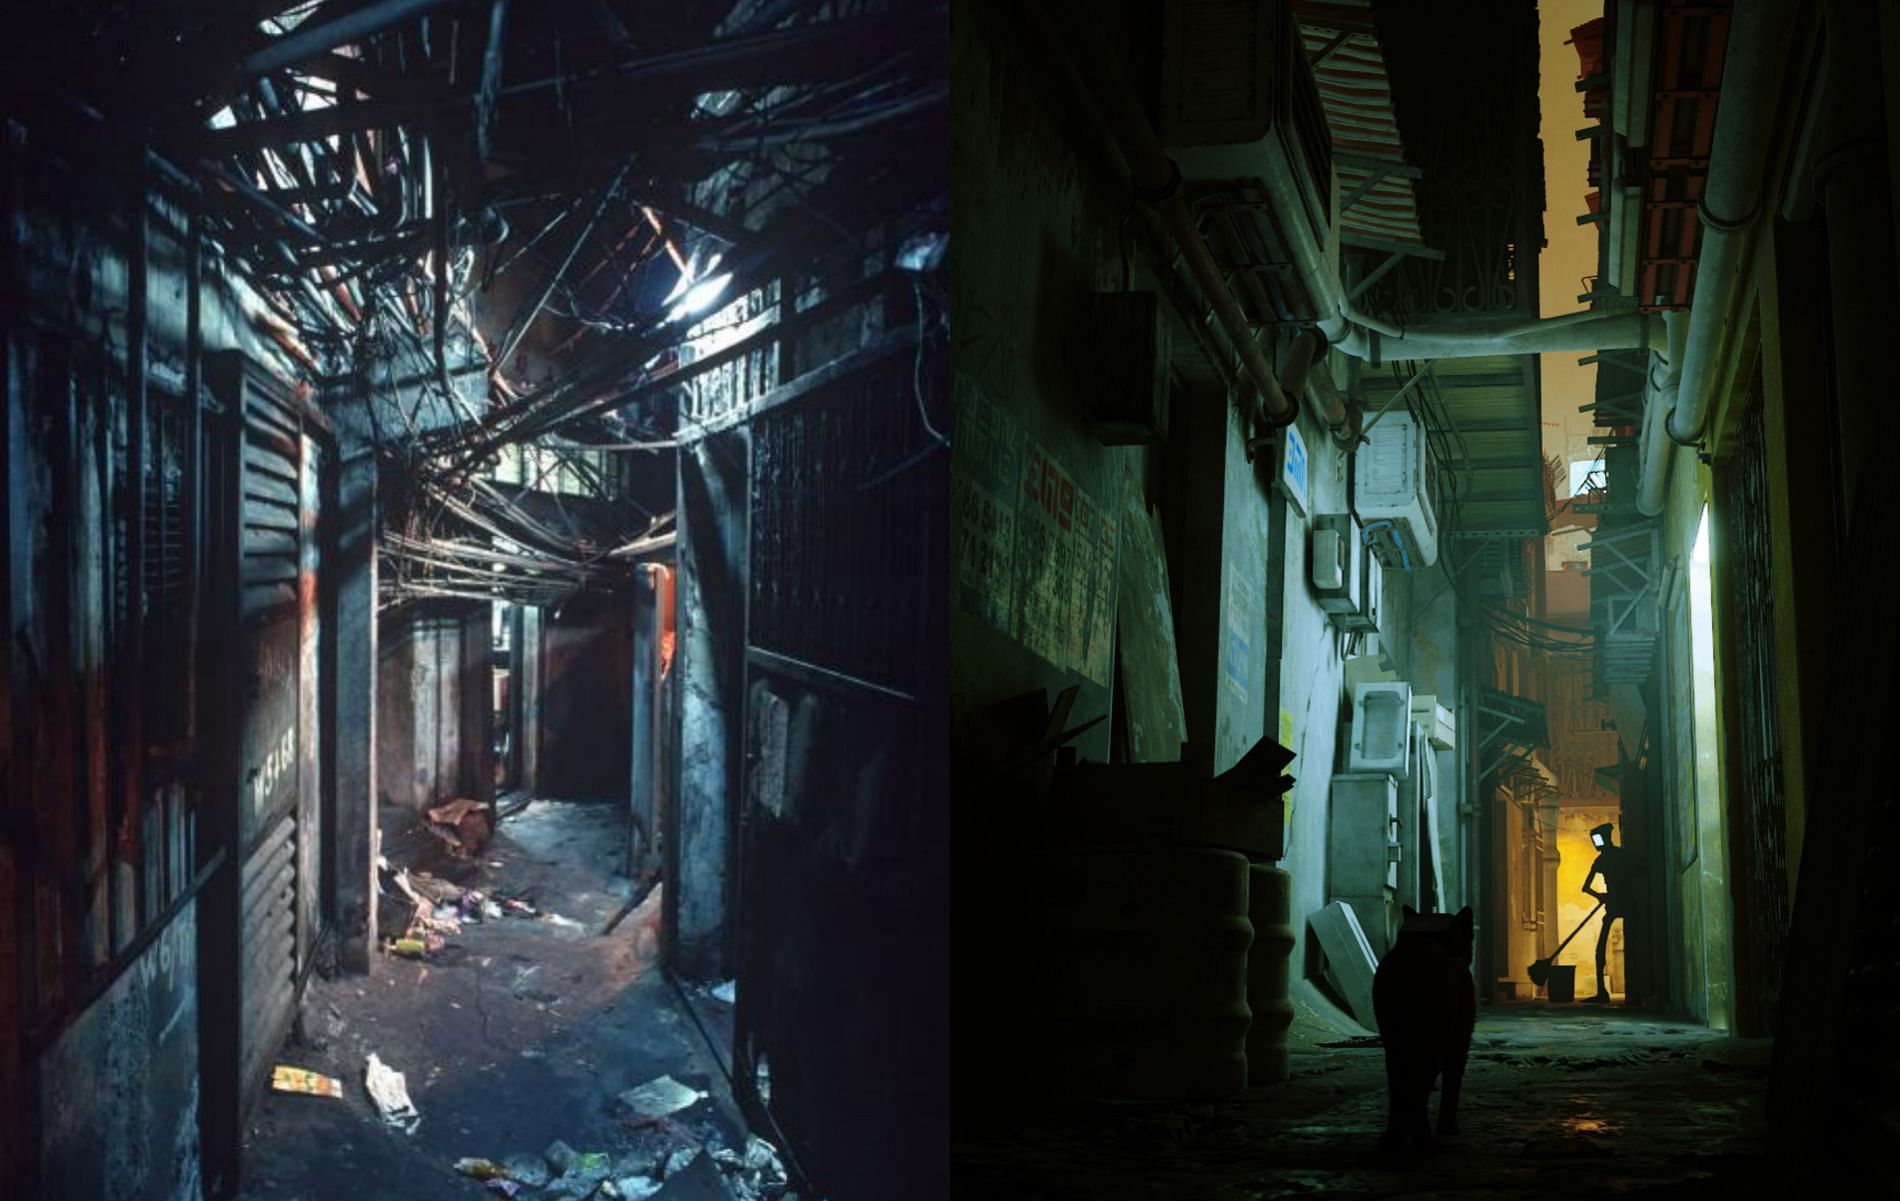 A look at the alleys (Image on left via Greg Girard, Image on right via Stray)